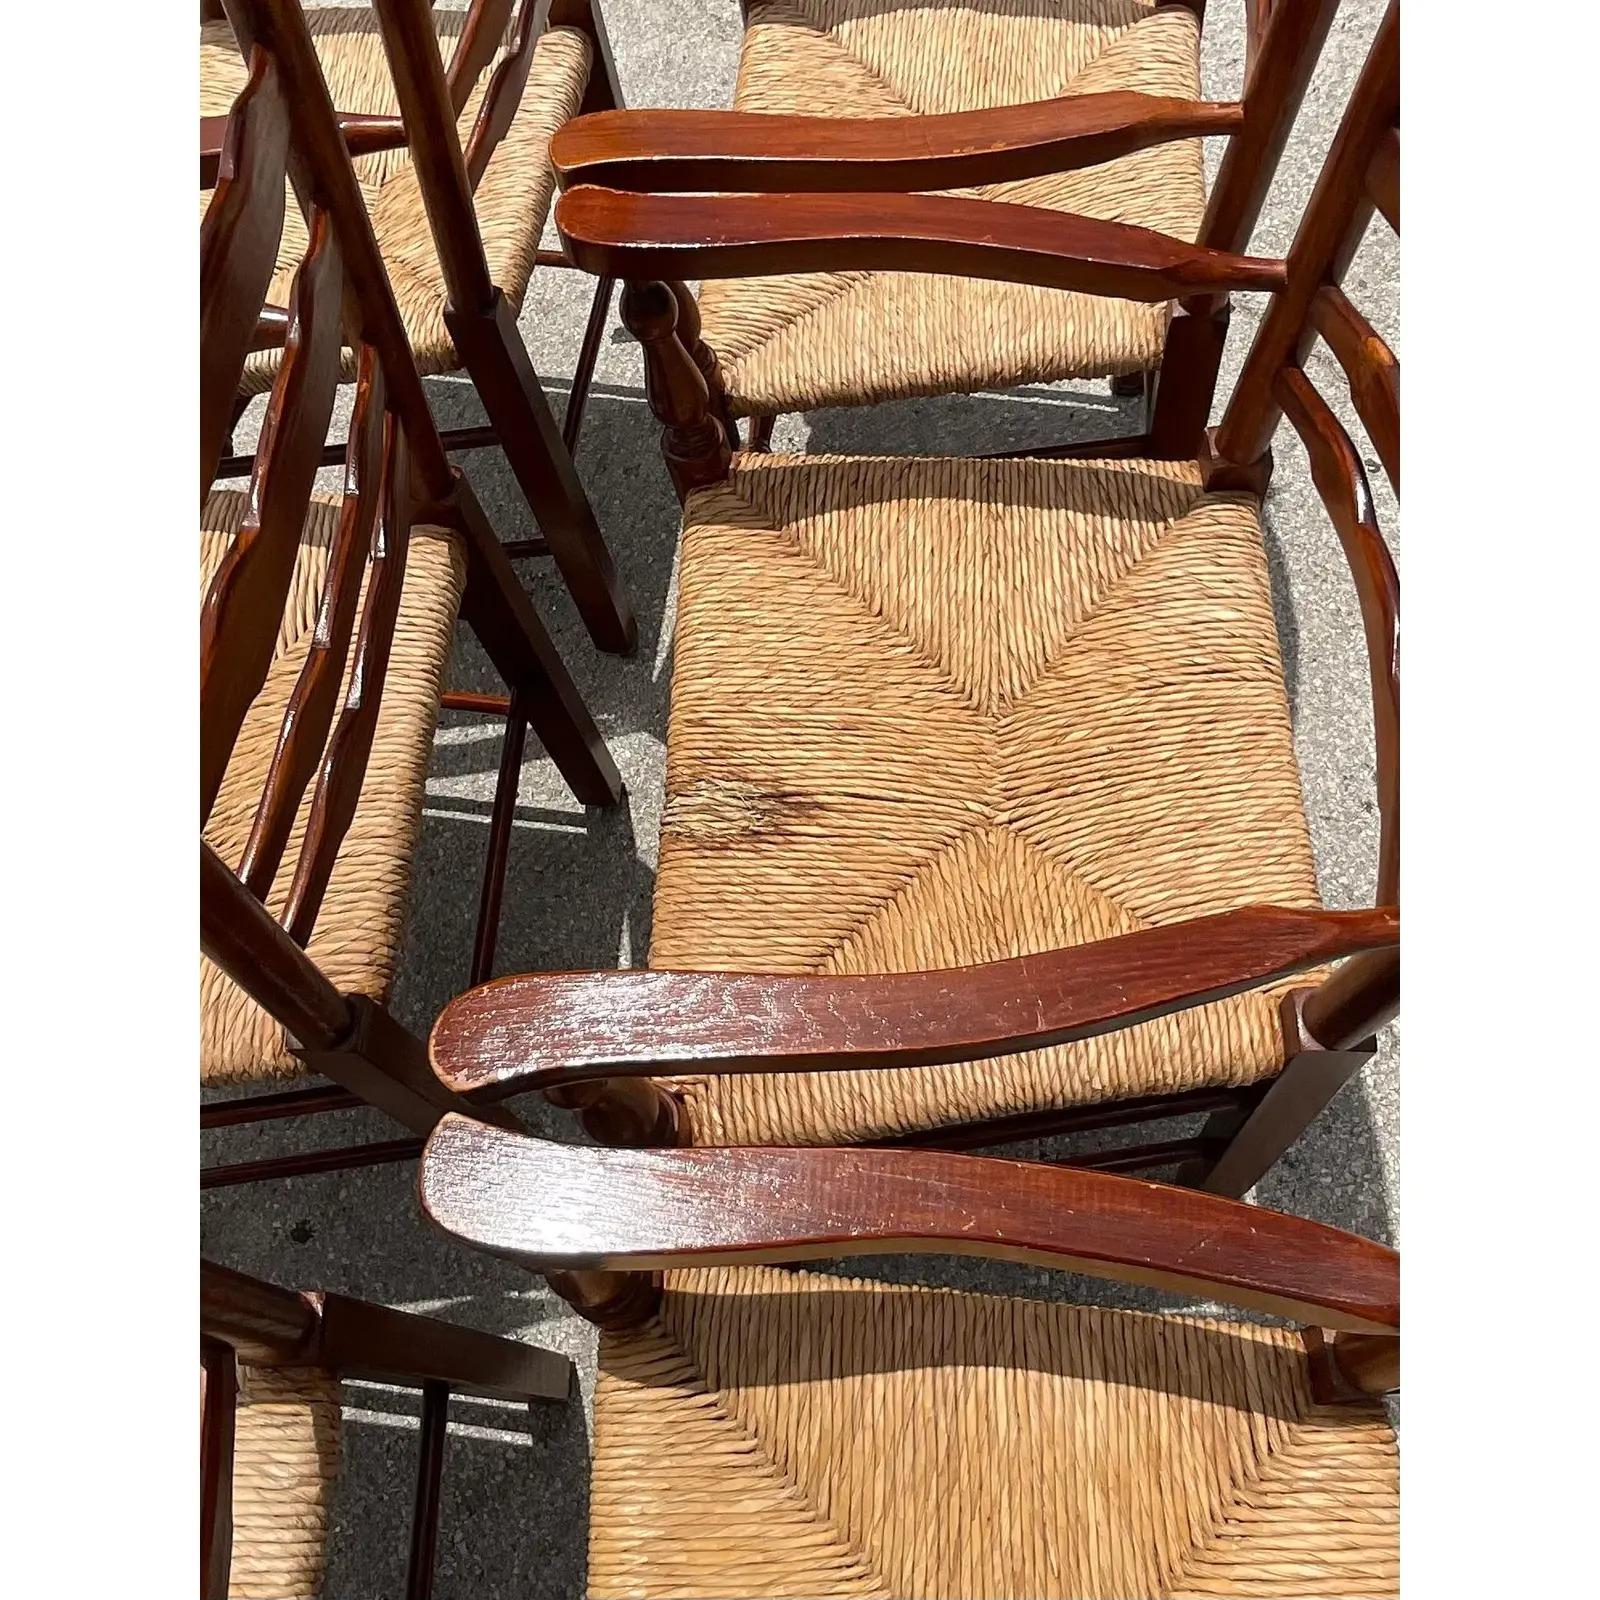 French Vintage Boho Pierre Deux Rush Seat Ladderback Dining Chairs, Set of 6